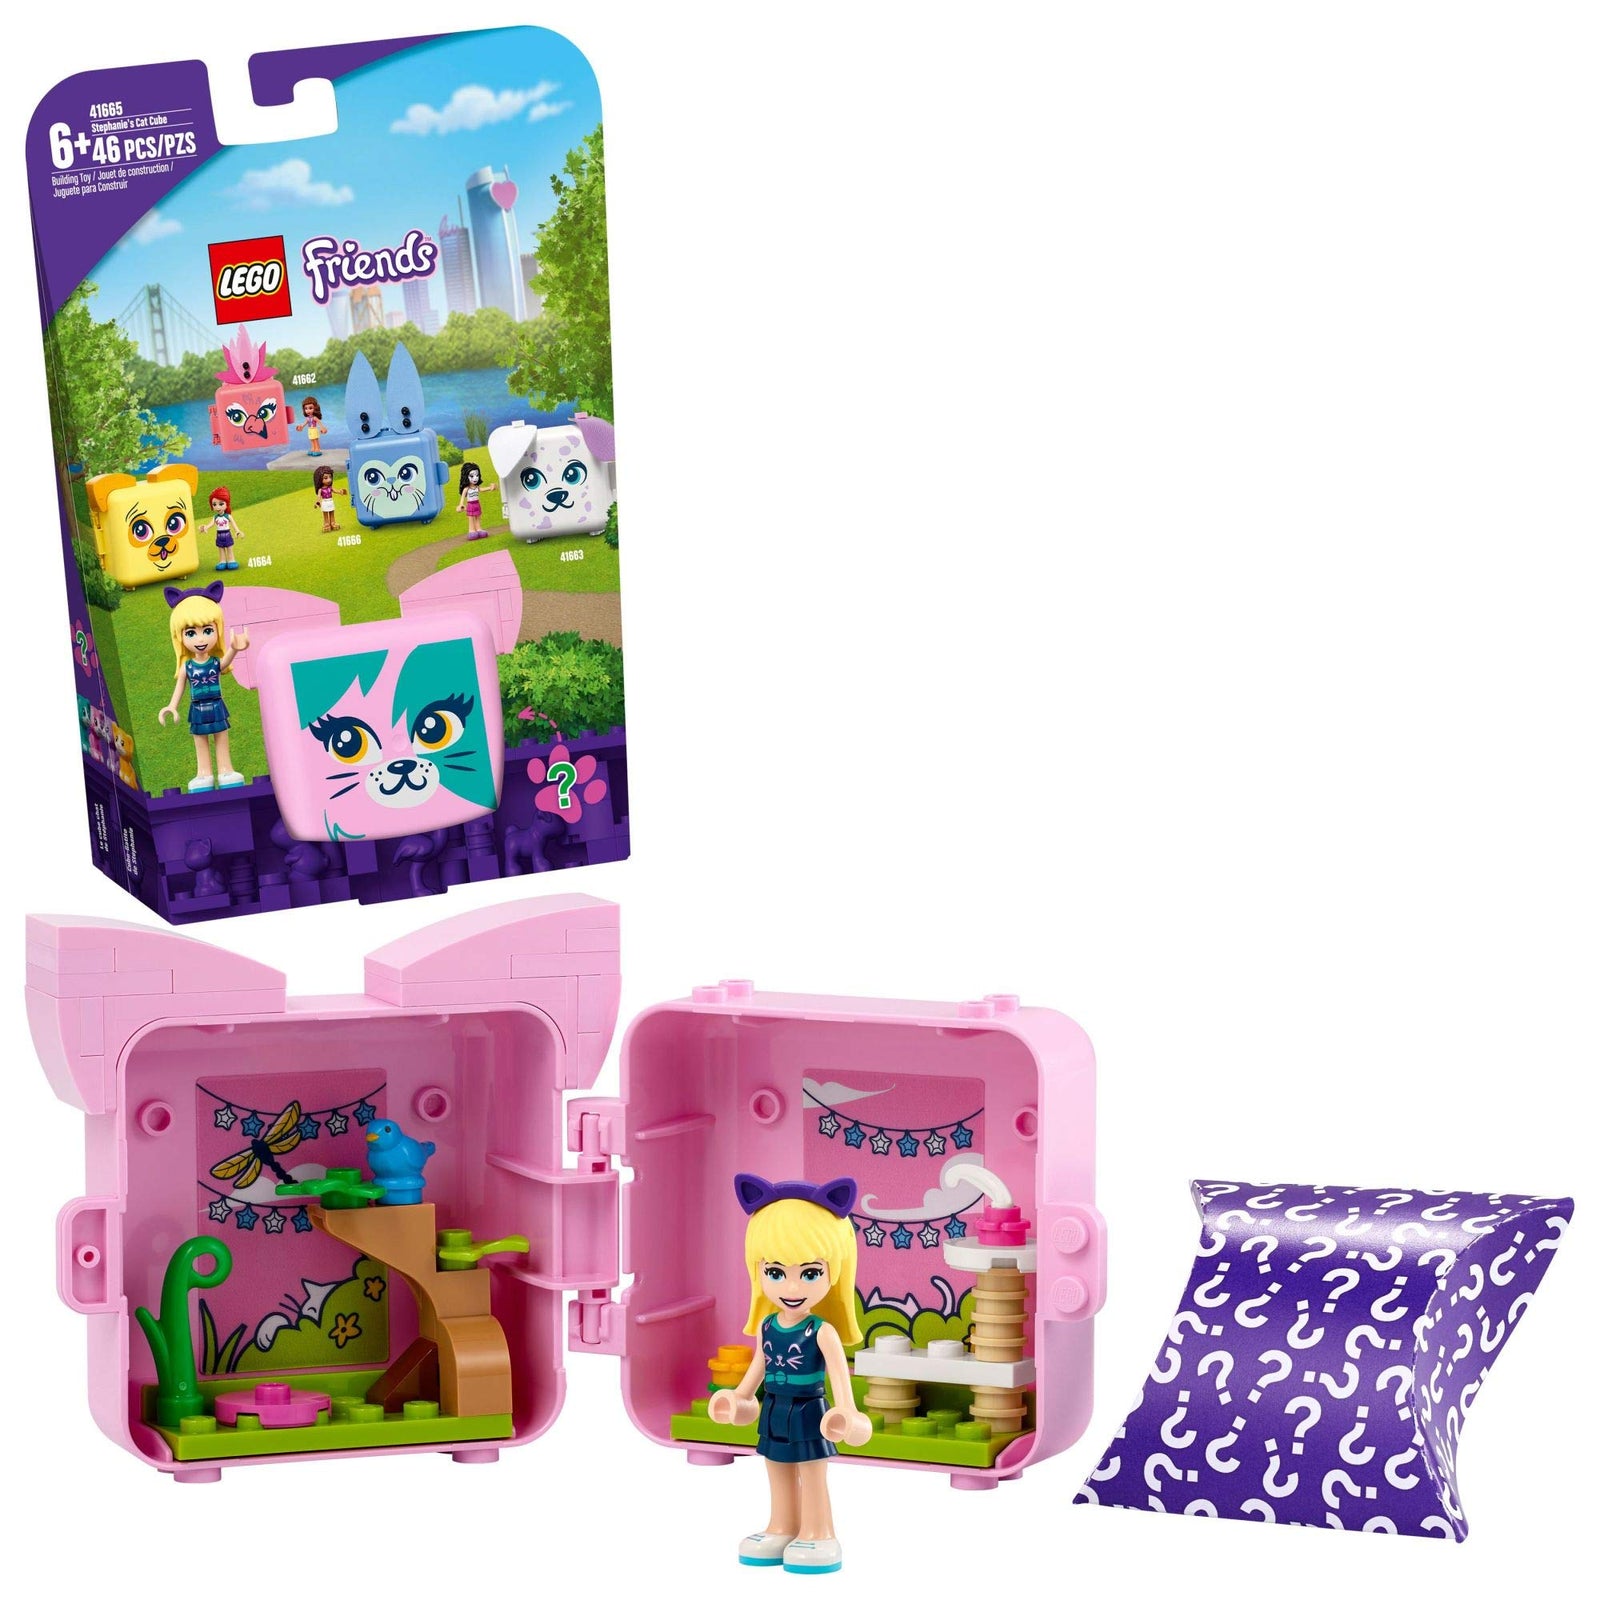 LEGO Friends Stephanie’s Cat Cube 41665 Building Kit; Kitten Toy for Kids with a Stephanie Mini-Doll Toy; Cat Toy Makes a Creative Gift for Kids Who Love Portable Playsets, New 2021 (46 Pieces)